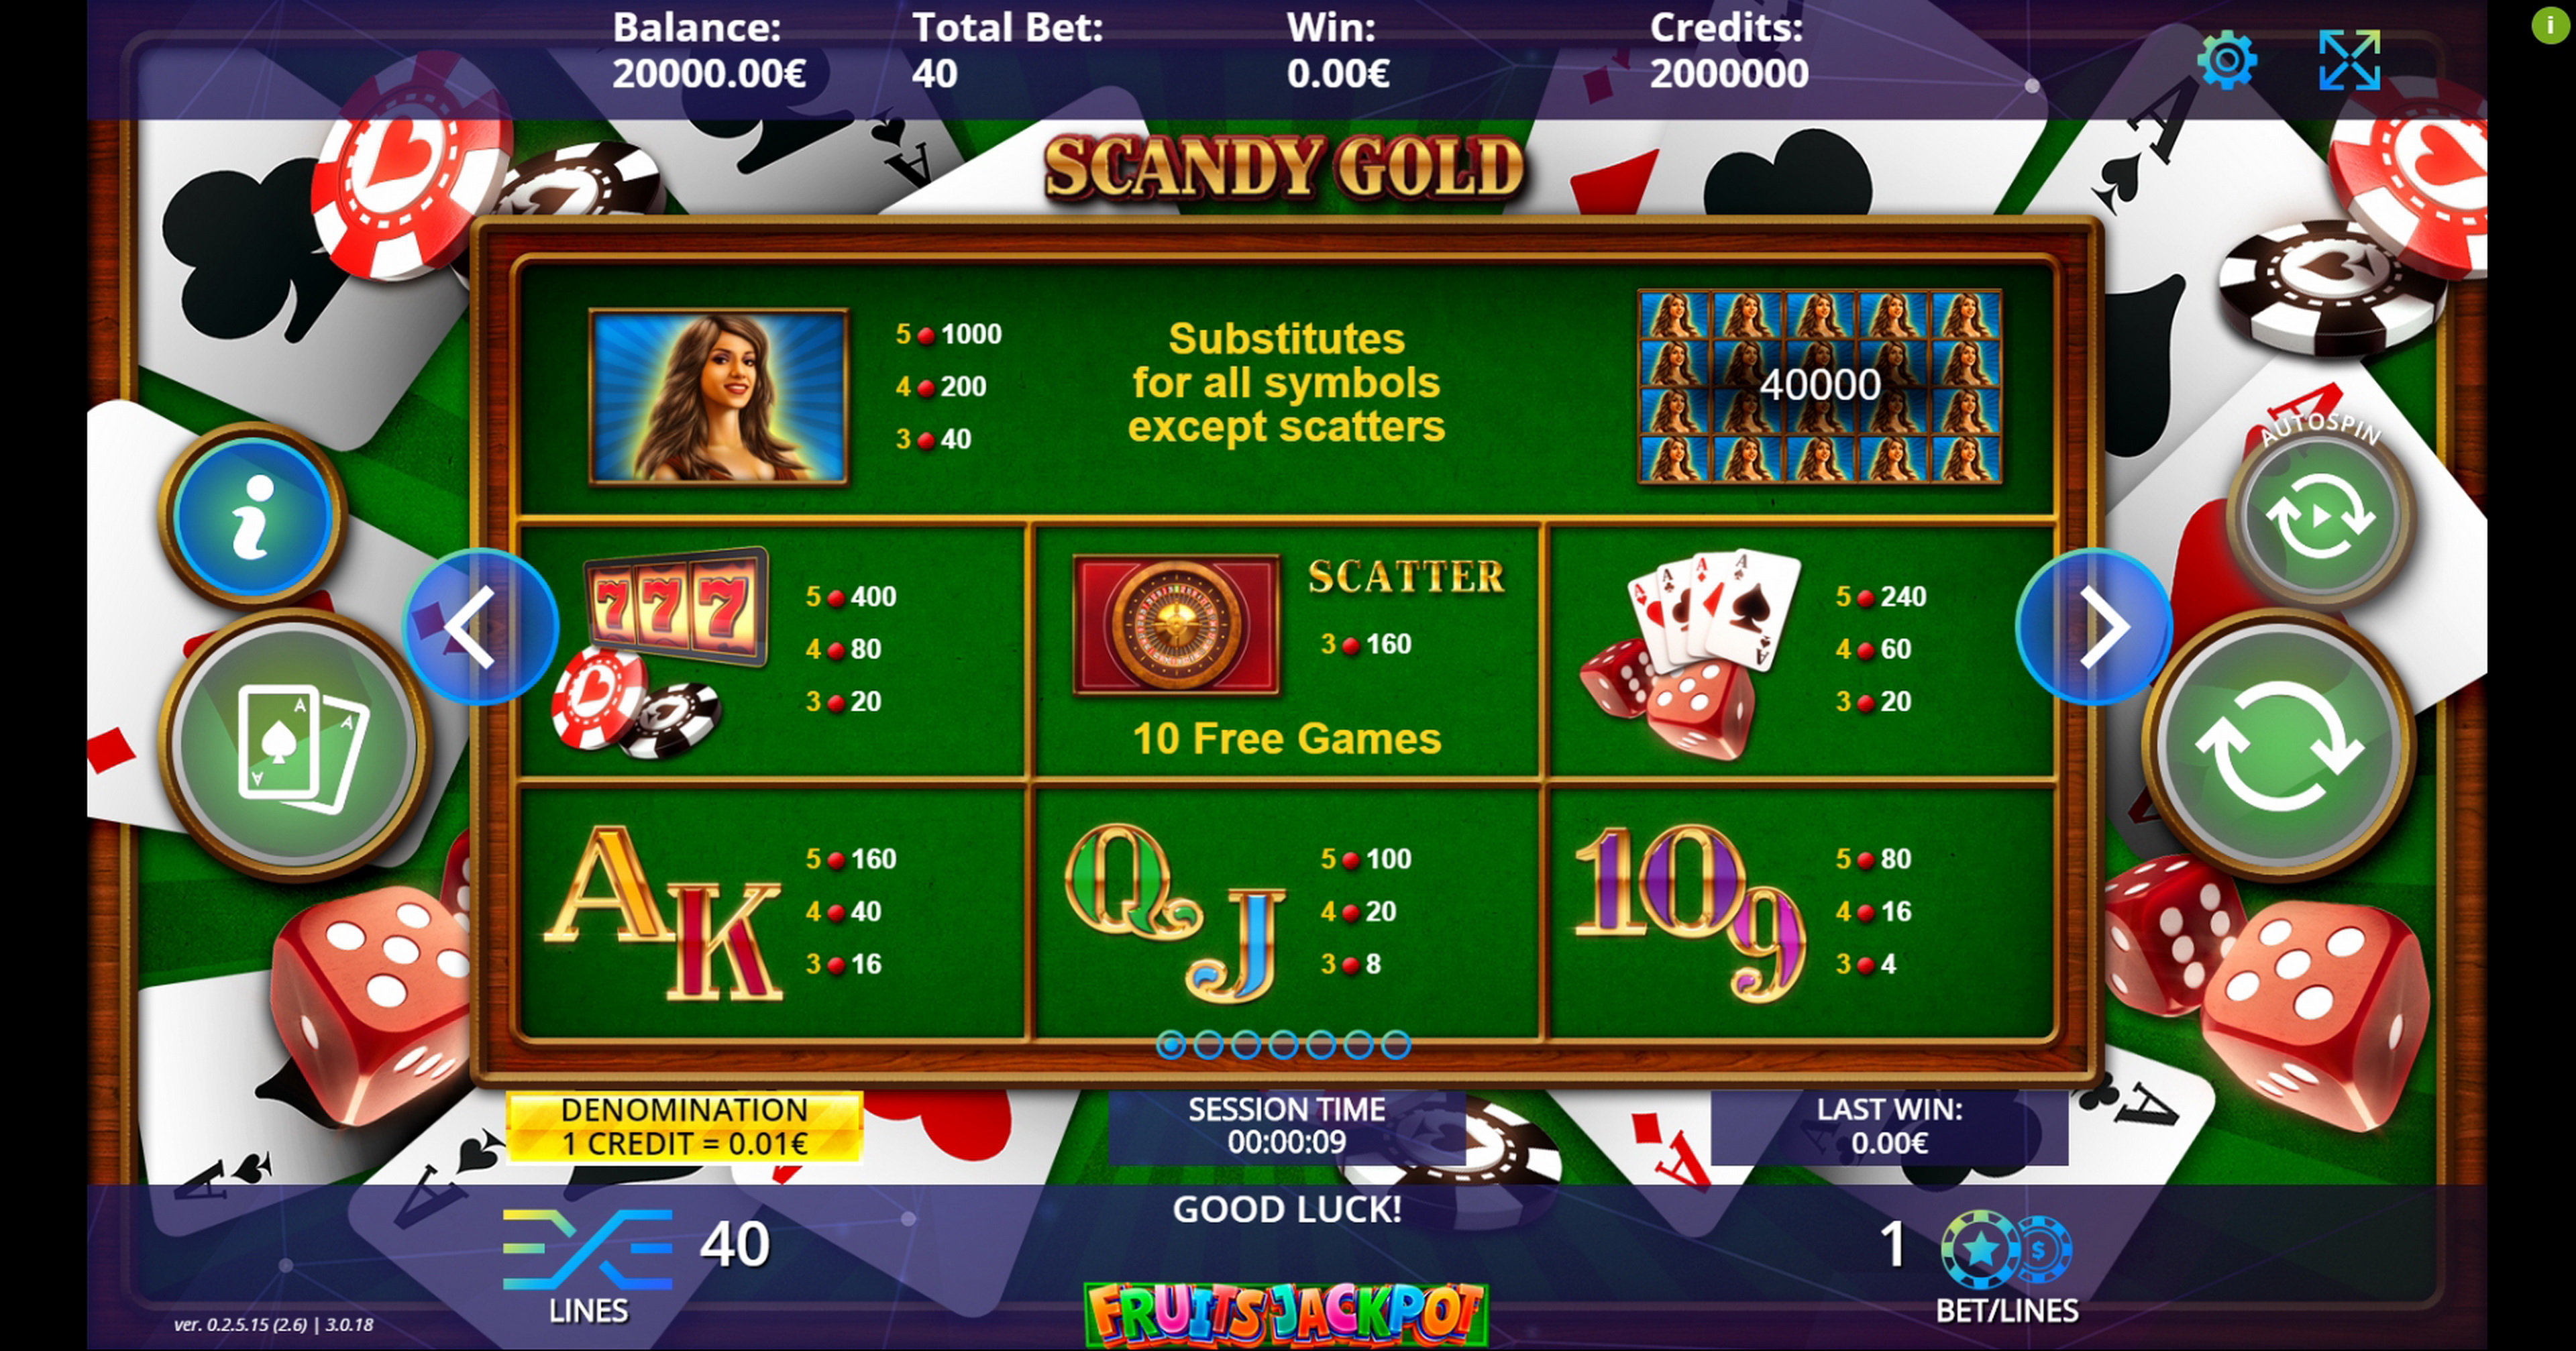 Info of Scandy Gold Fruits Jackpot Slot Game by DLV